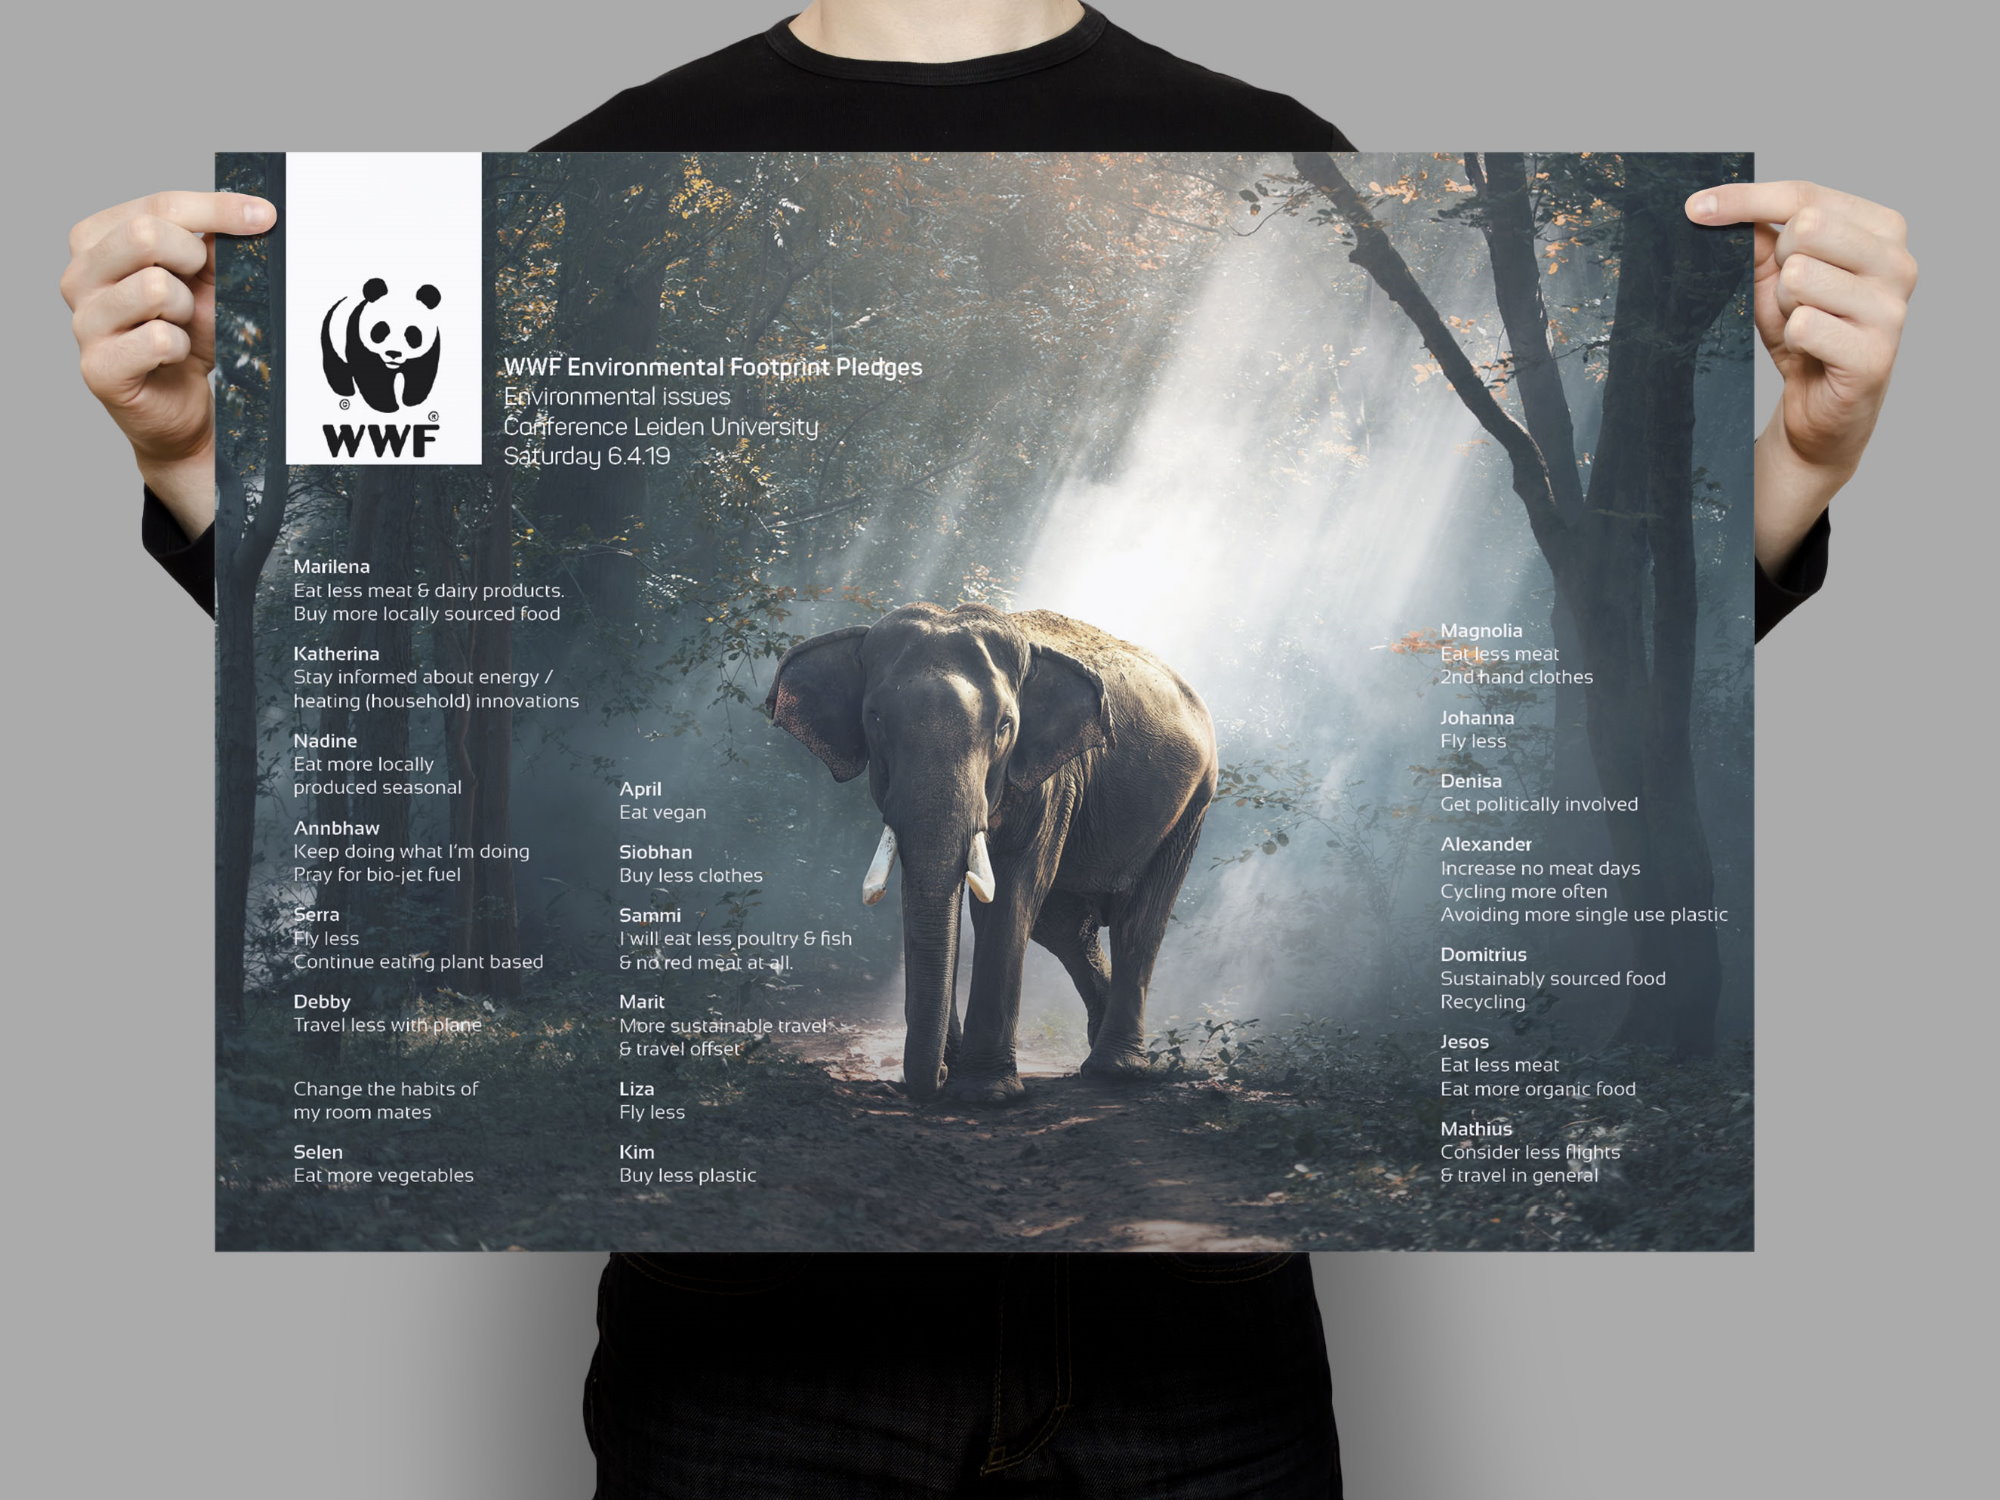 WWF <small>Presented By: Studio98.nl</small>